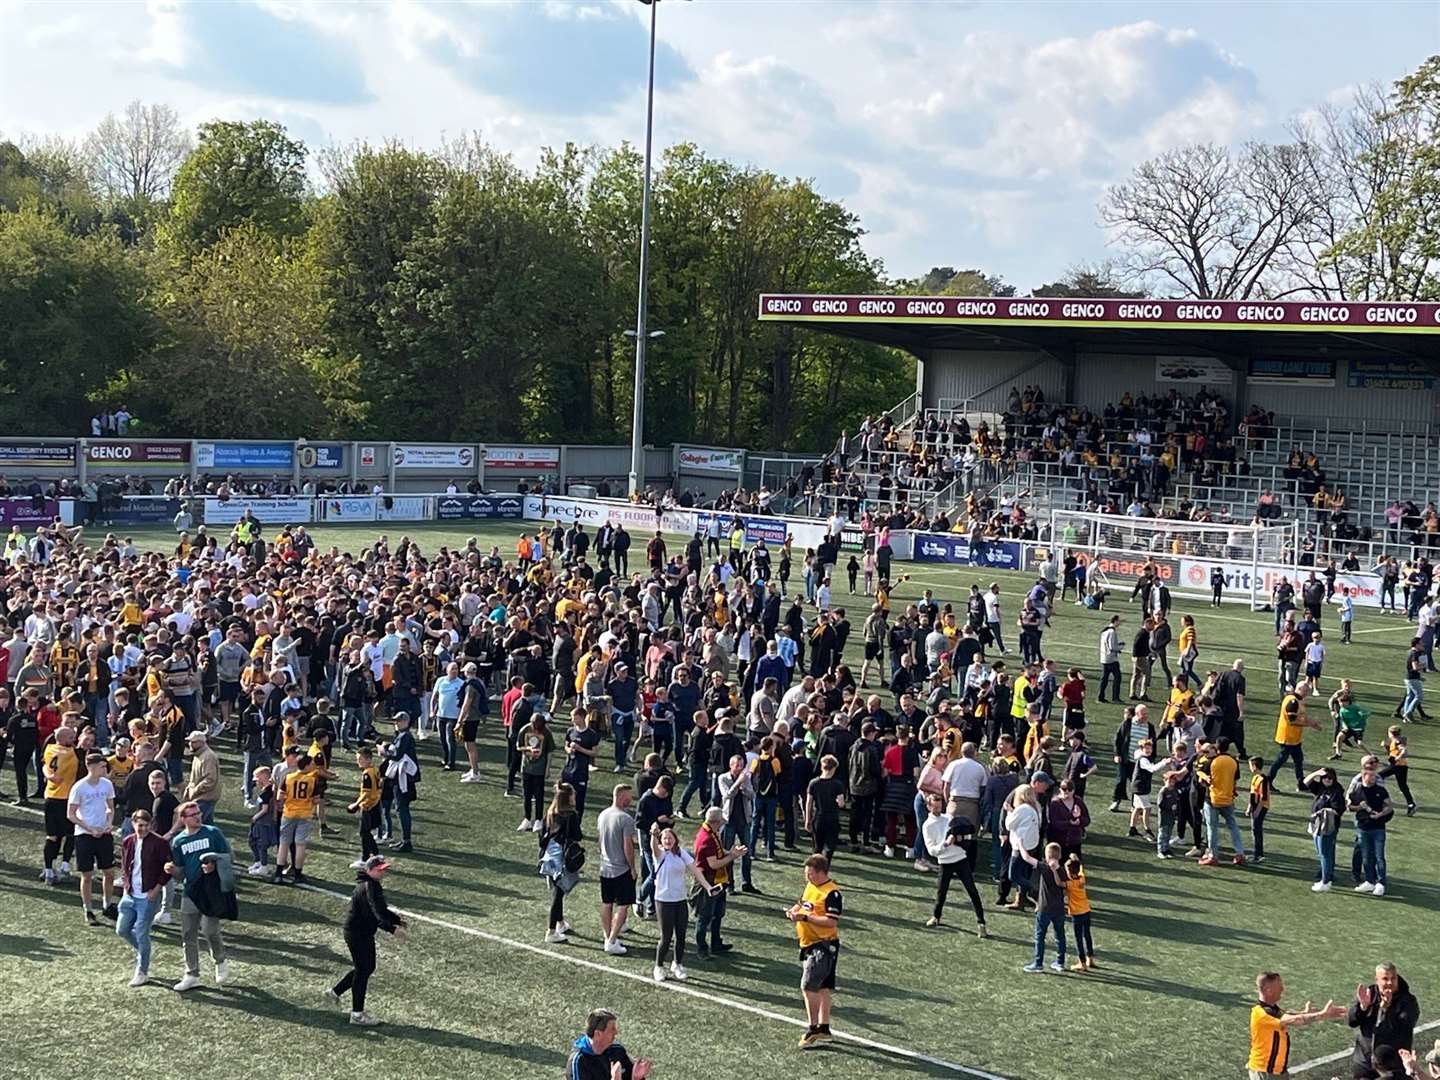 The celebrations begin as Maidstone are confirmed National South champions